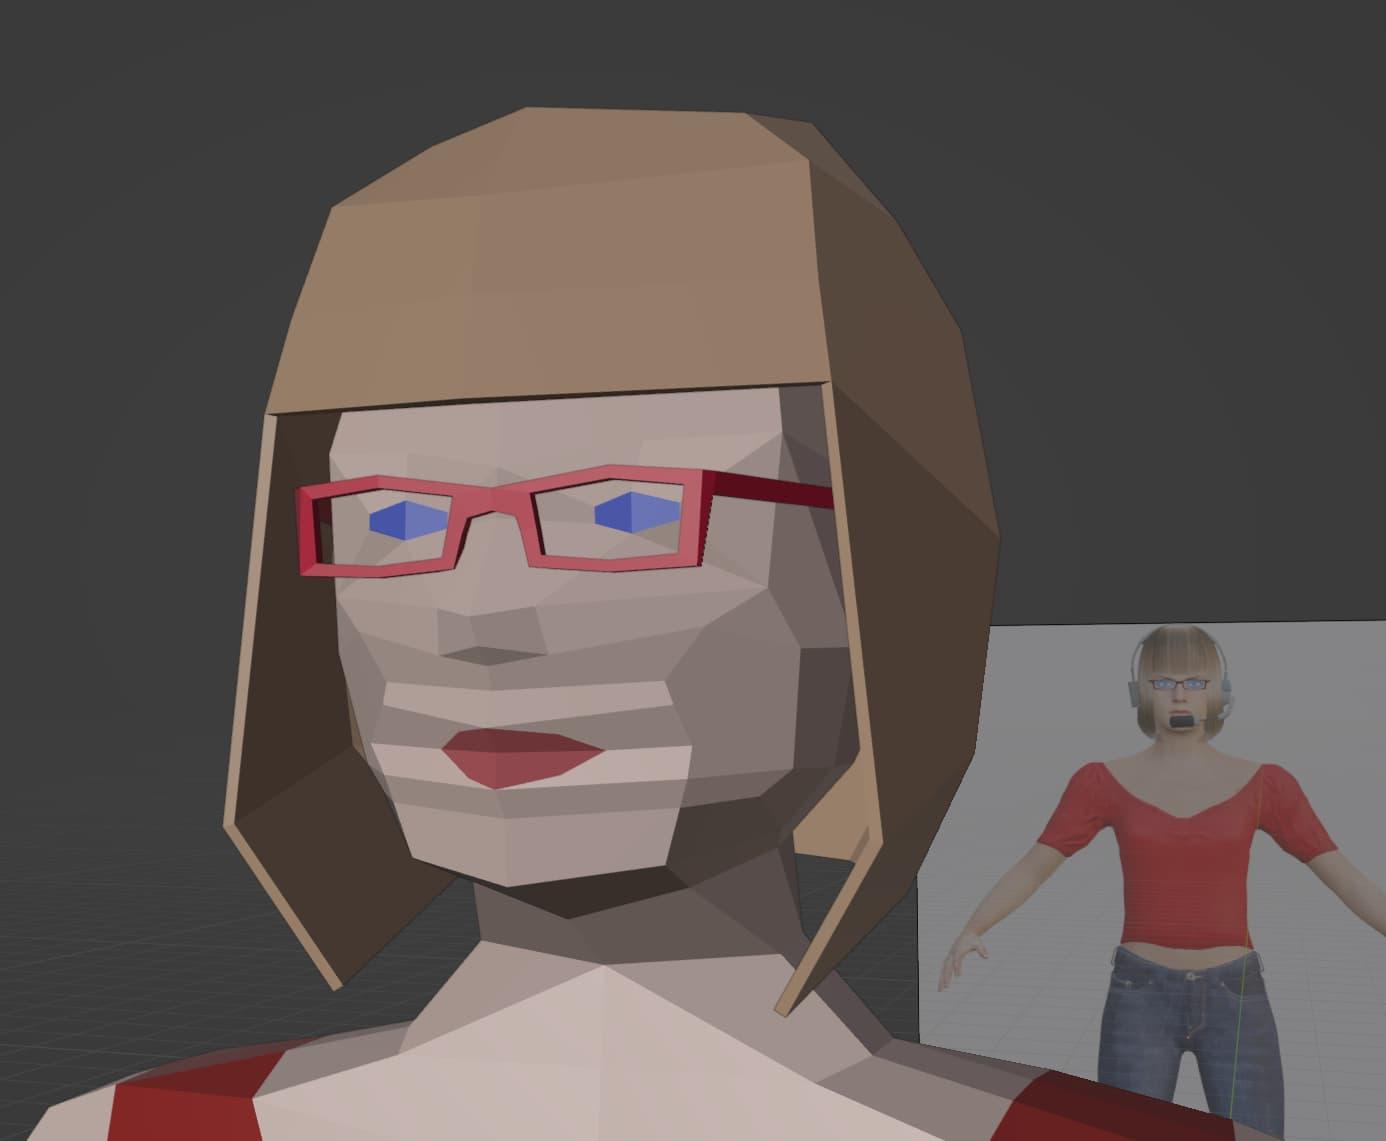 A 3D model of a blonde woman's head, with blue eyes and pink lips, wearing red glasses